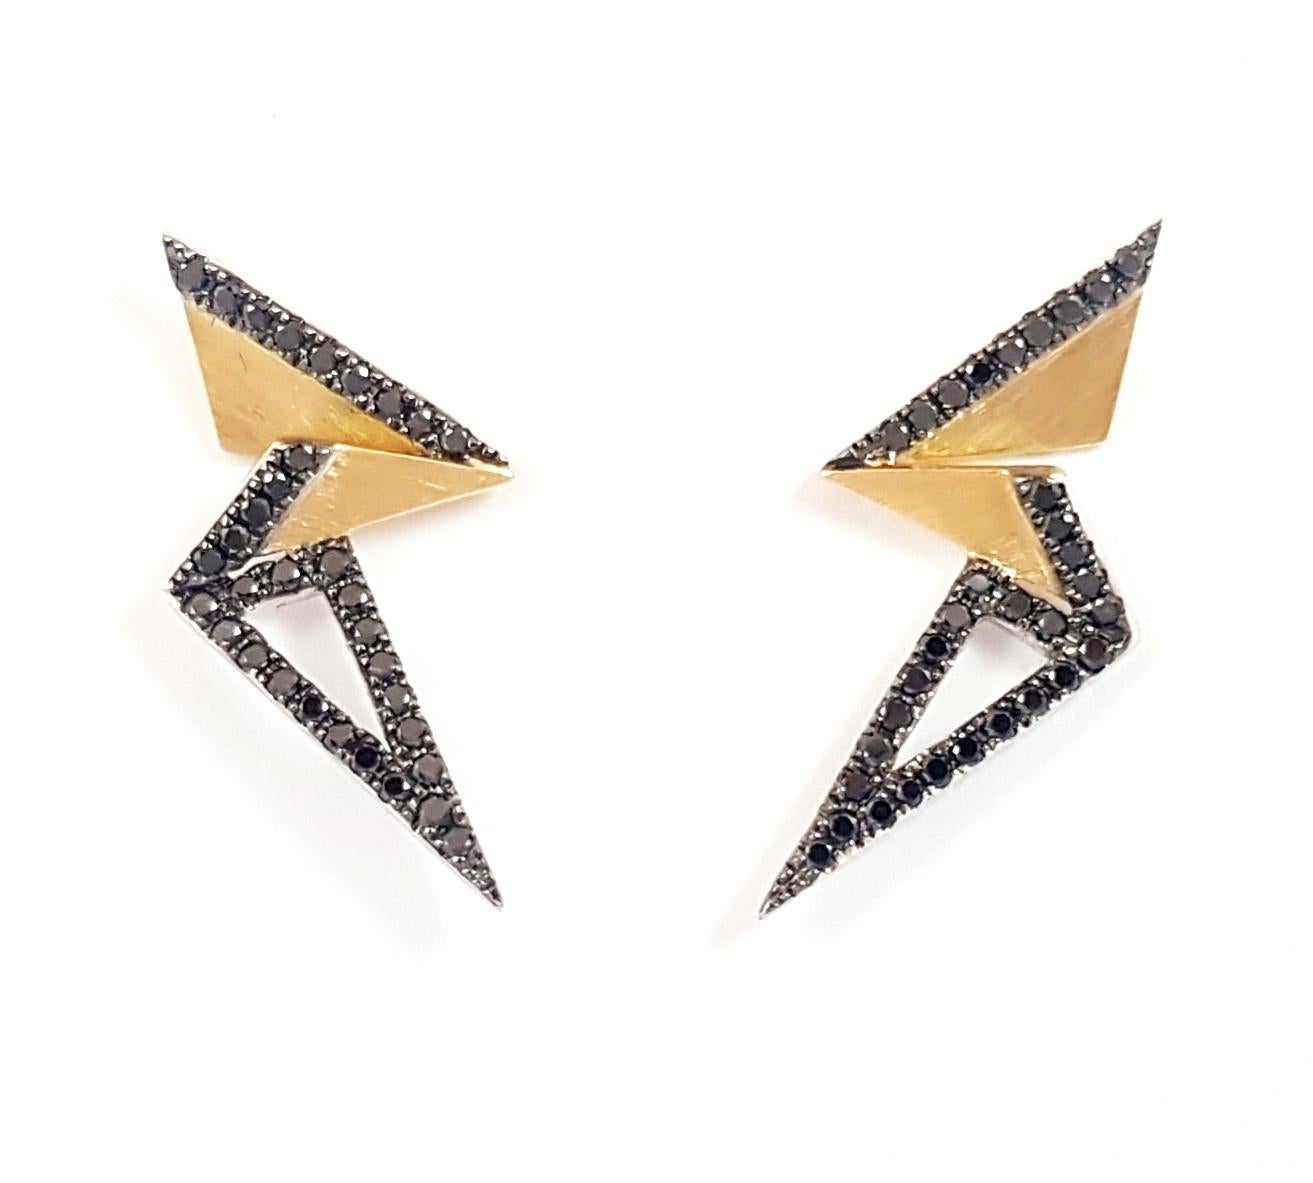 Black Diamond 0.63 carat Earrings set in 18K Gold Settings

Width: 1.4 cm
Length: 3.0 cm
Weight: 6.36 grams

The ancient Japanese tradition of paper folding has inspired the form and elements of this modern collection. With a series of folds and